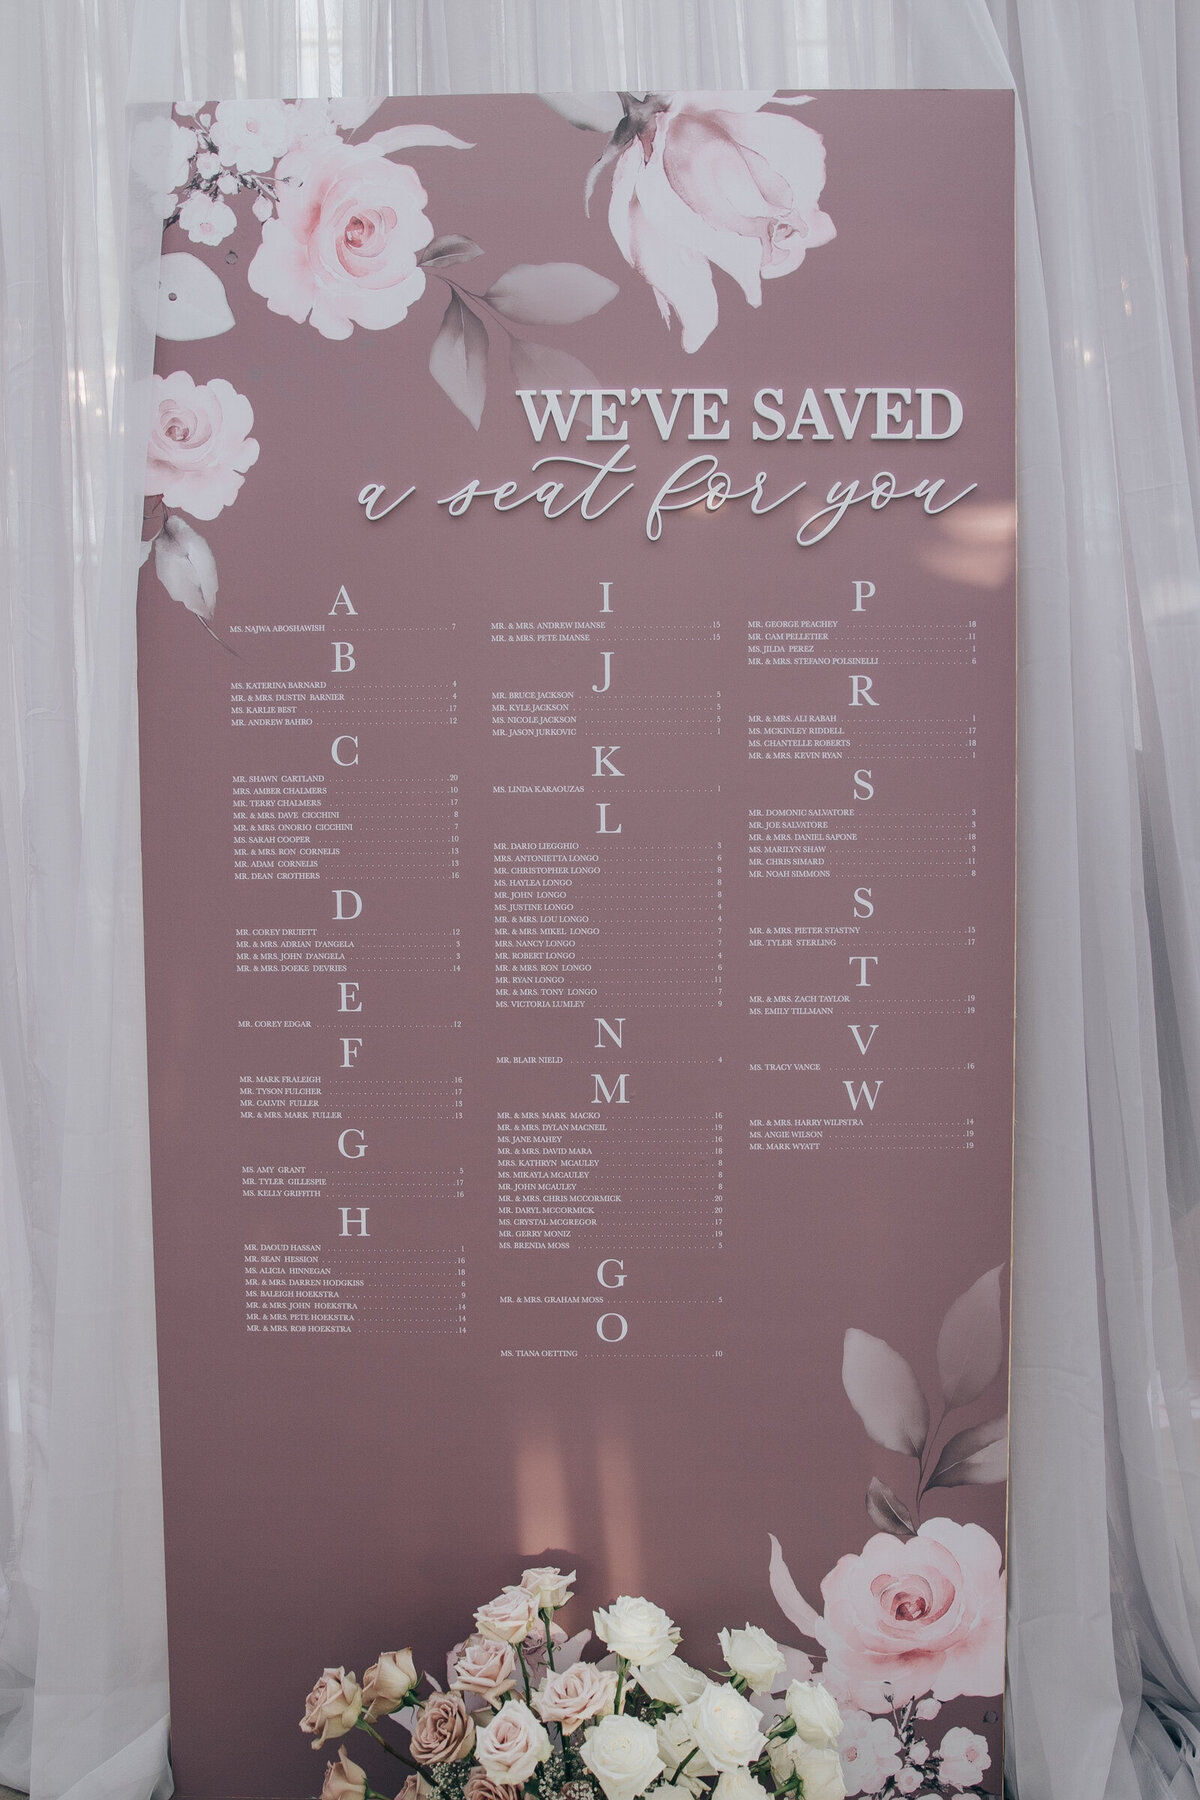 Chic lavender and floral themed seating chart for glamorous wedding